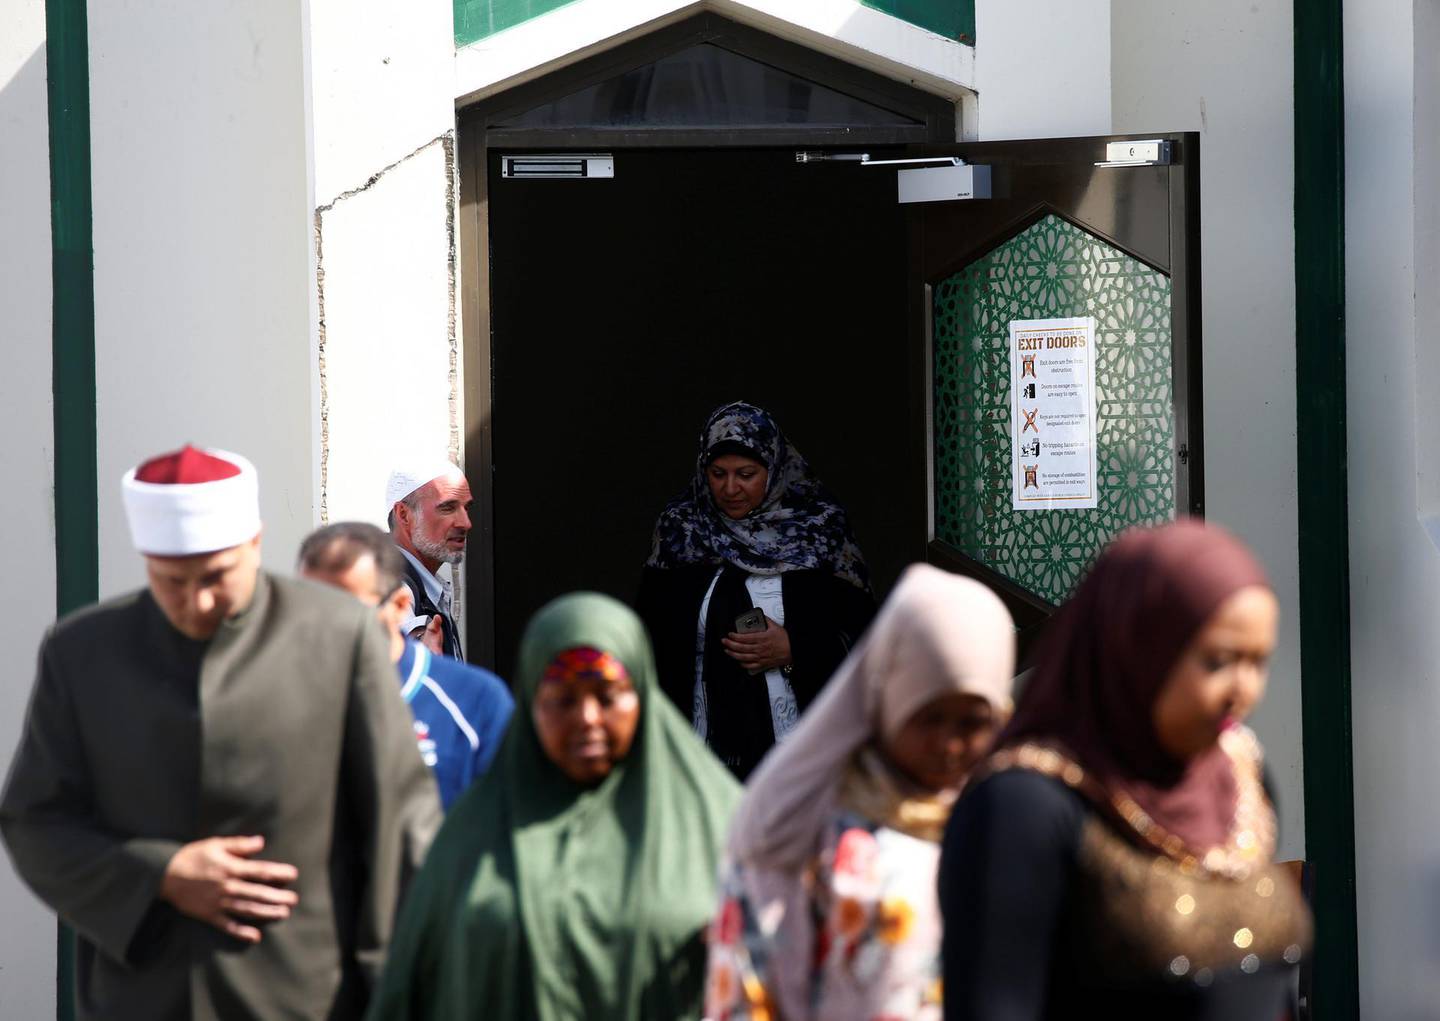 Members of the Muslim community visit Al-Noor mosque after it was reopened in Christchurch, New Zealand, March 23, 2019. REUTERS/Edgar Su